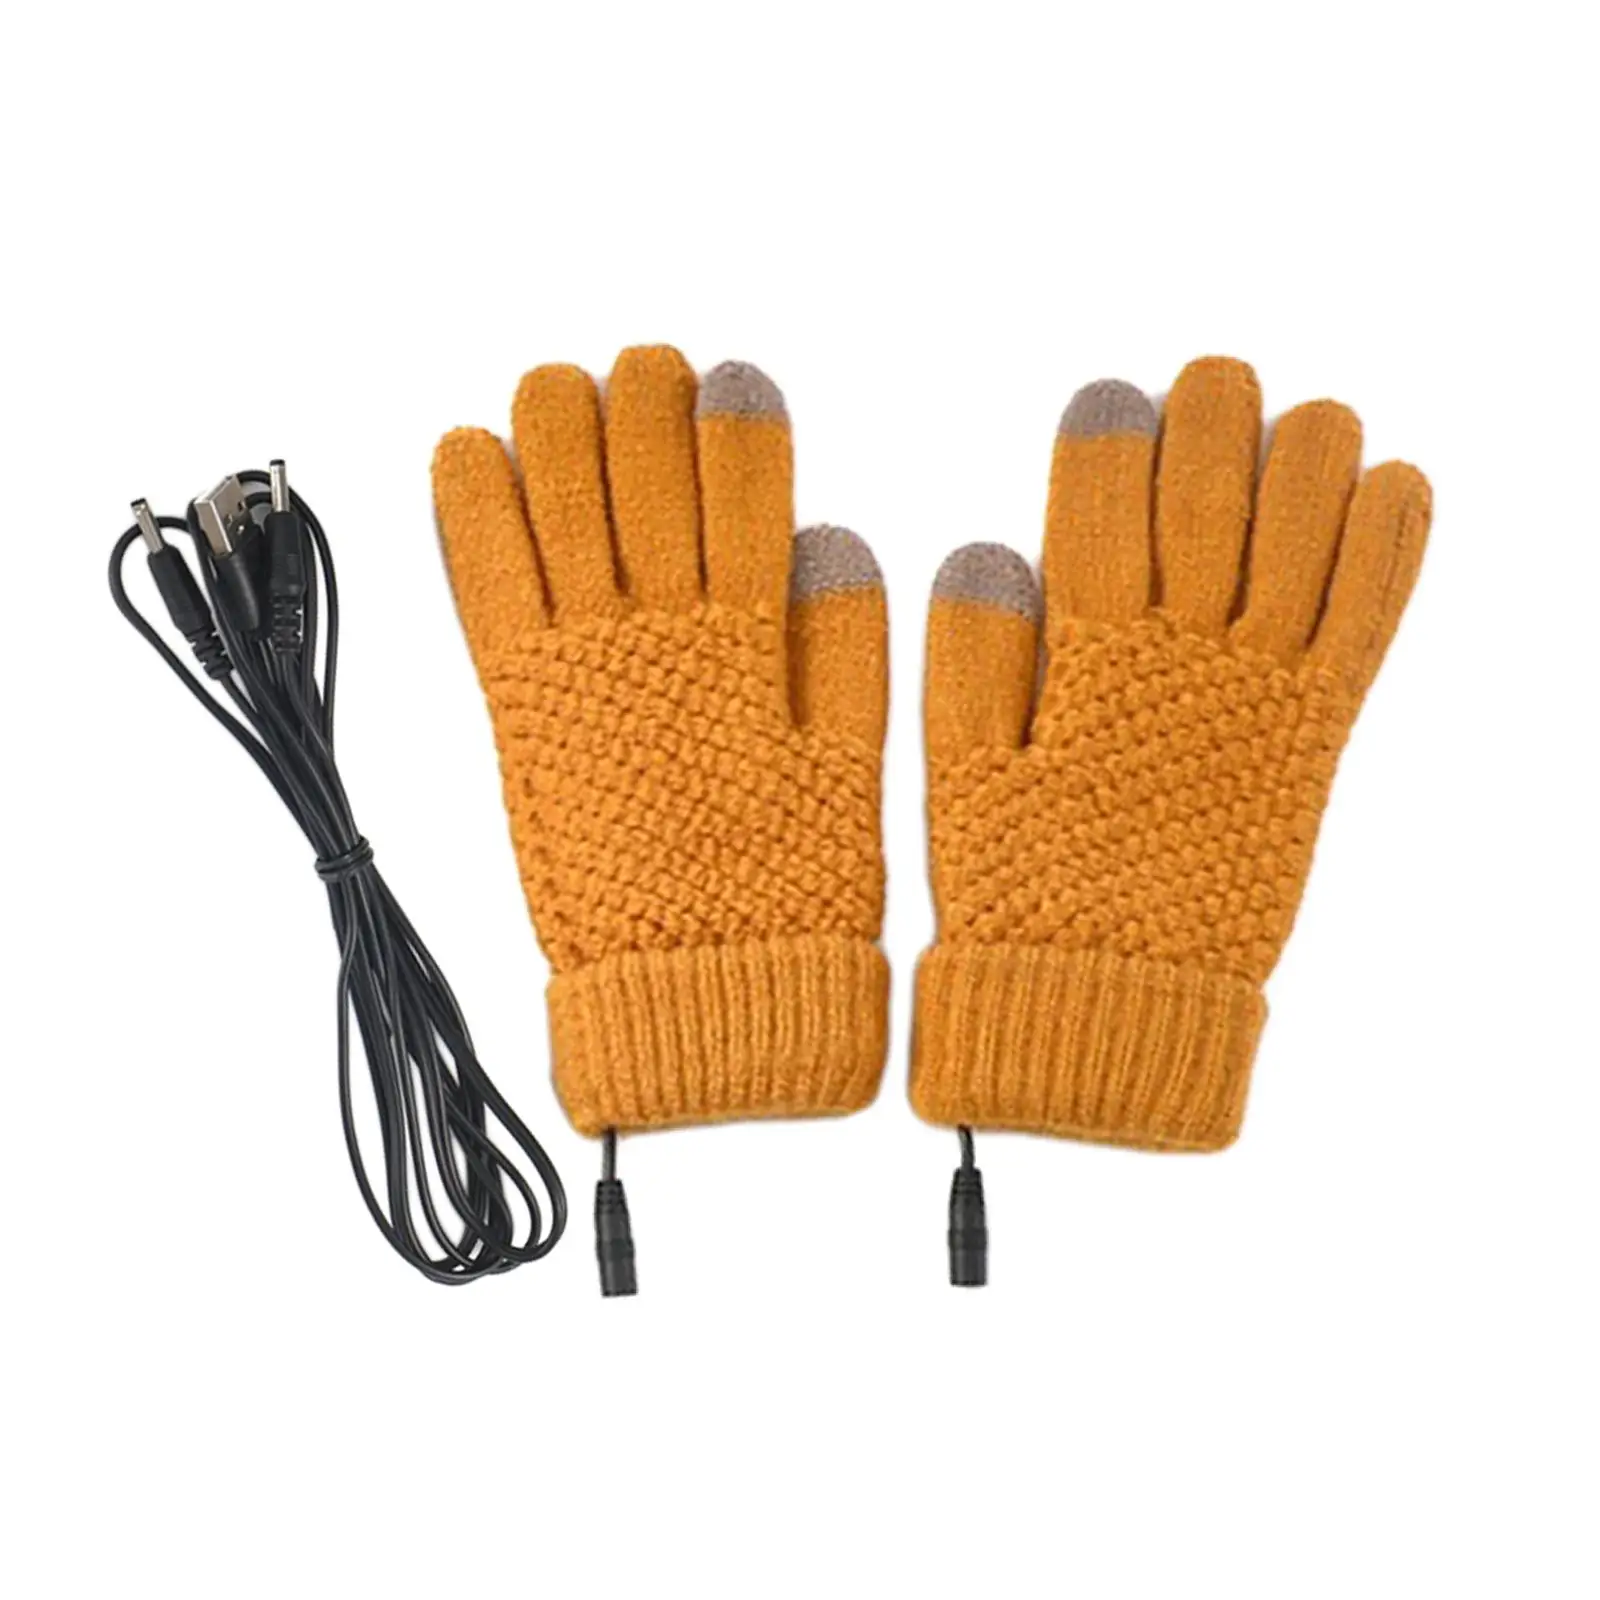 USB Heated Gloves Washable Electric Hands Warmer for Cycling Outdoor Hiking